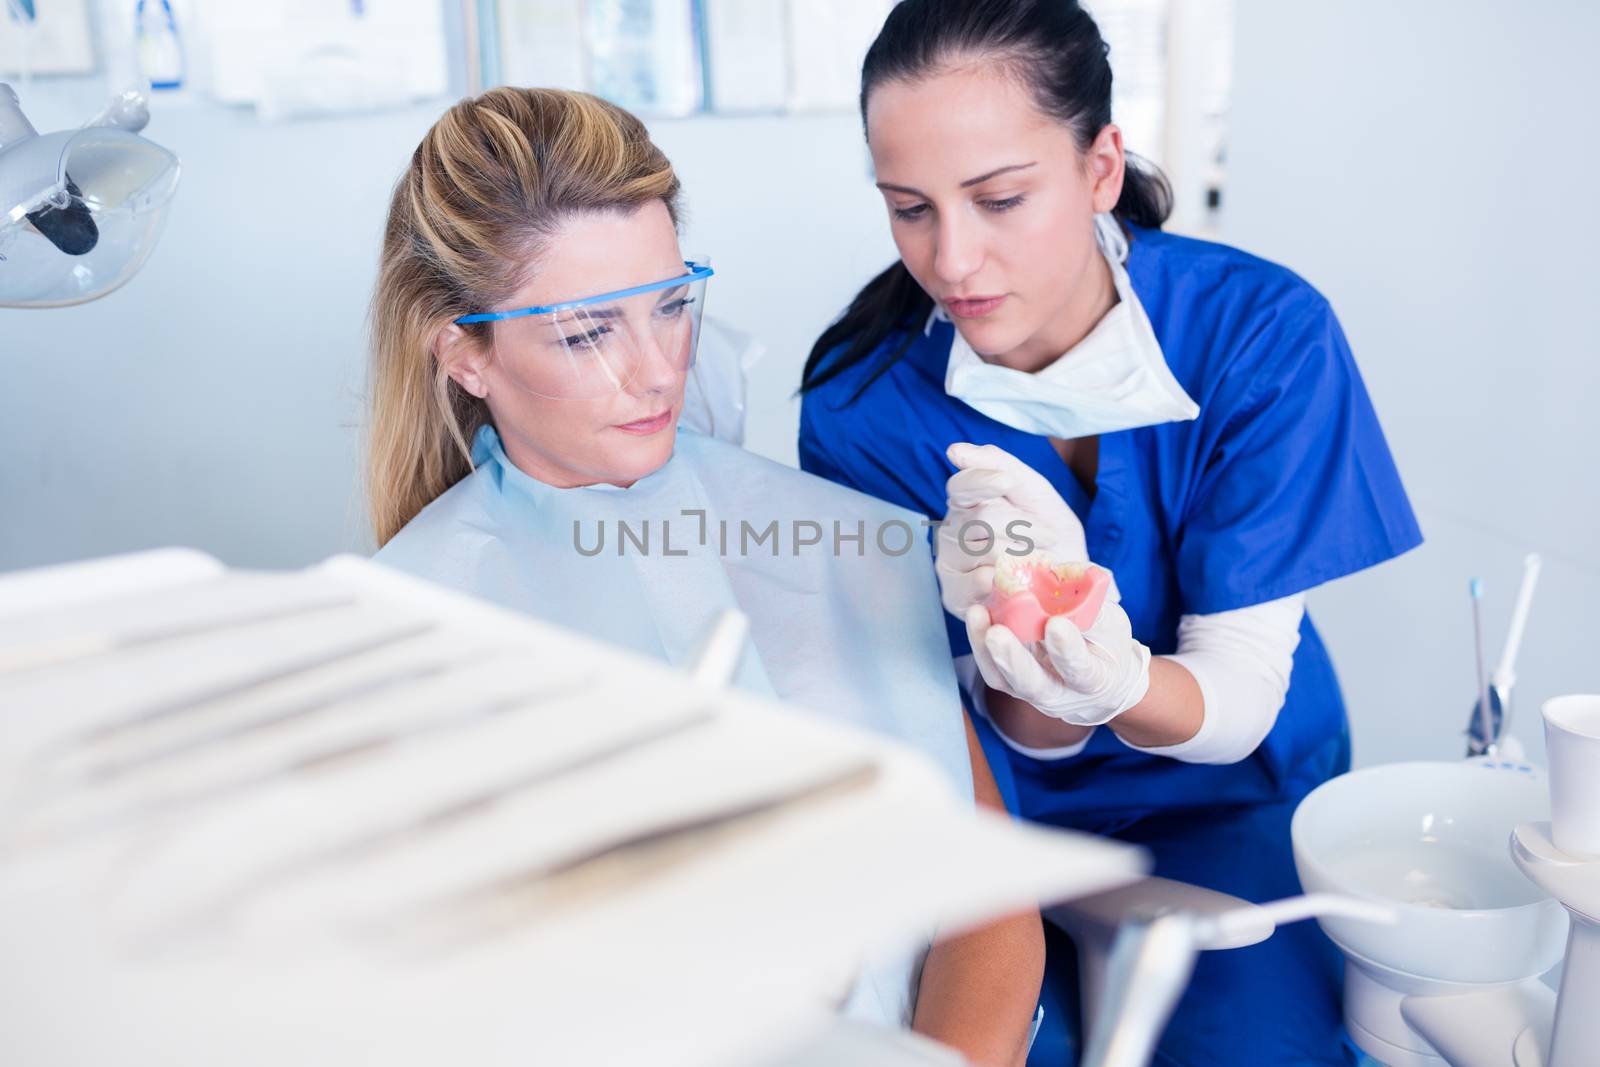 Dentist showing patient model of teeth at the dental clinic